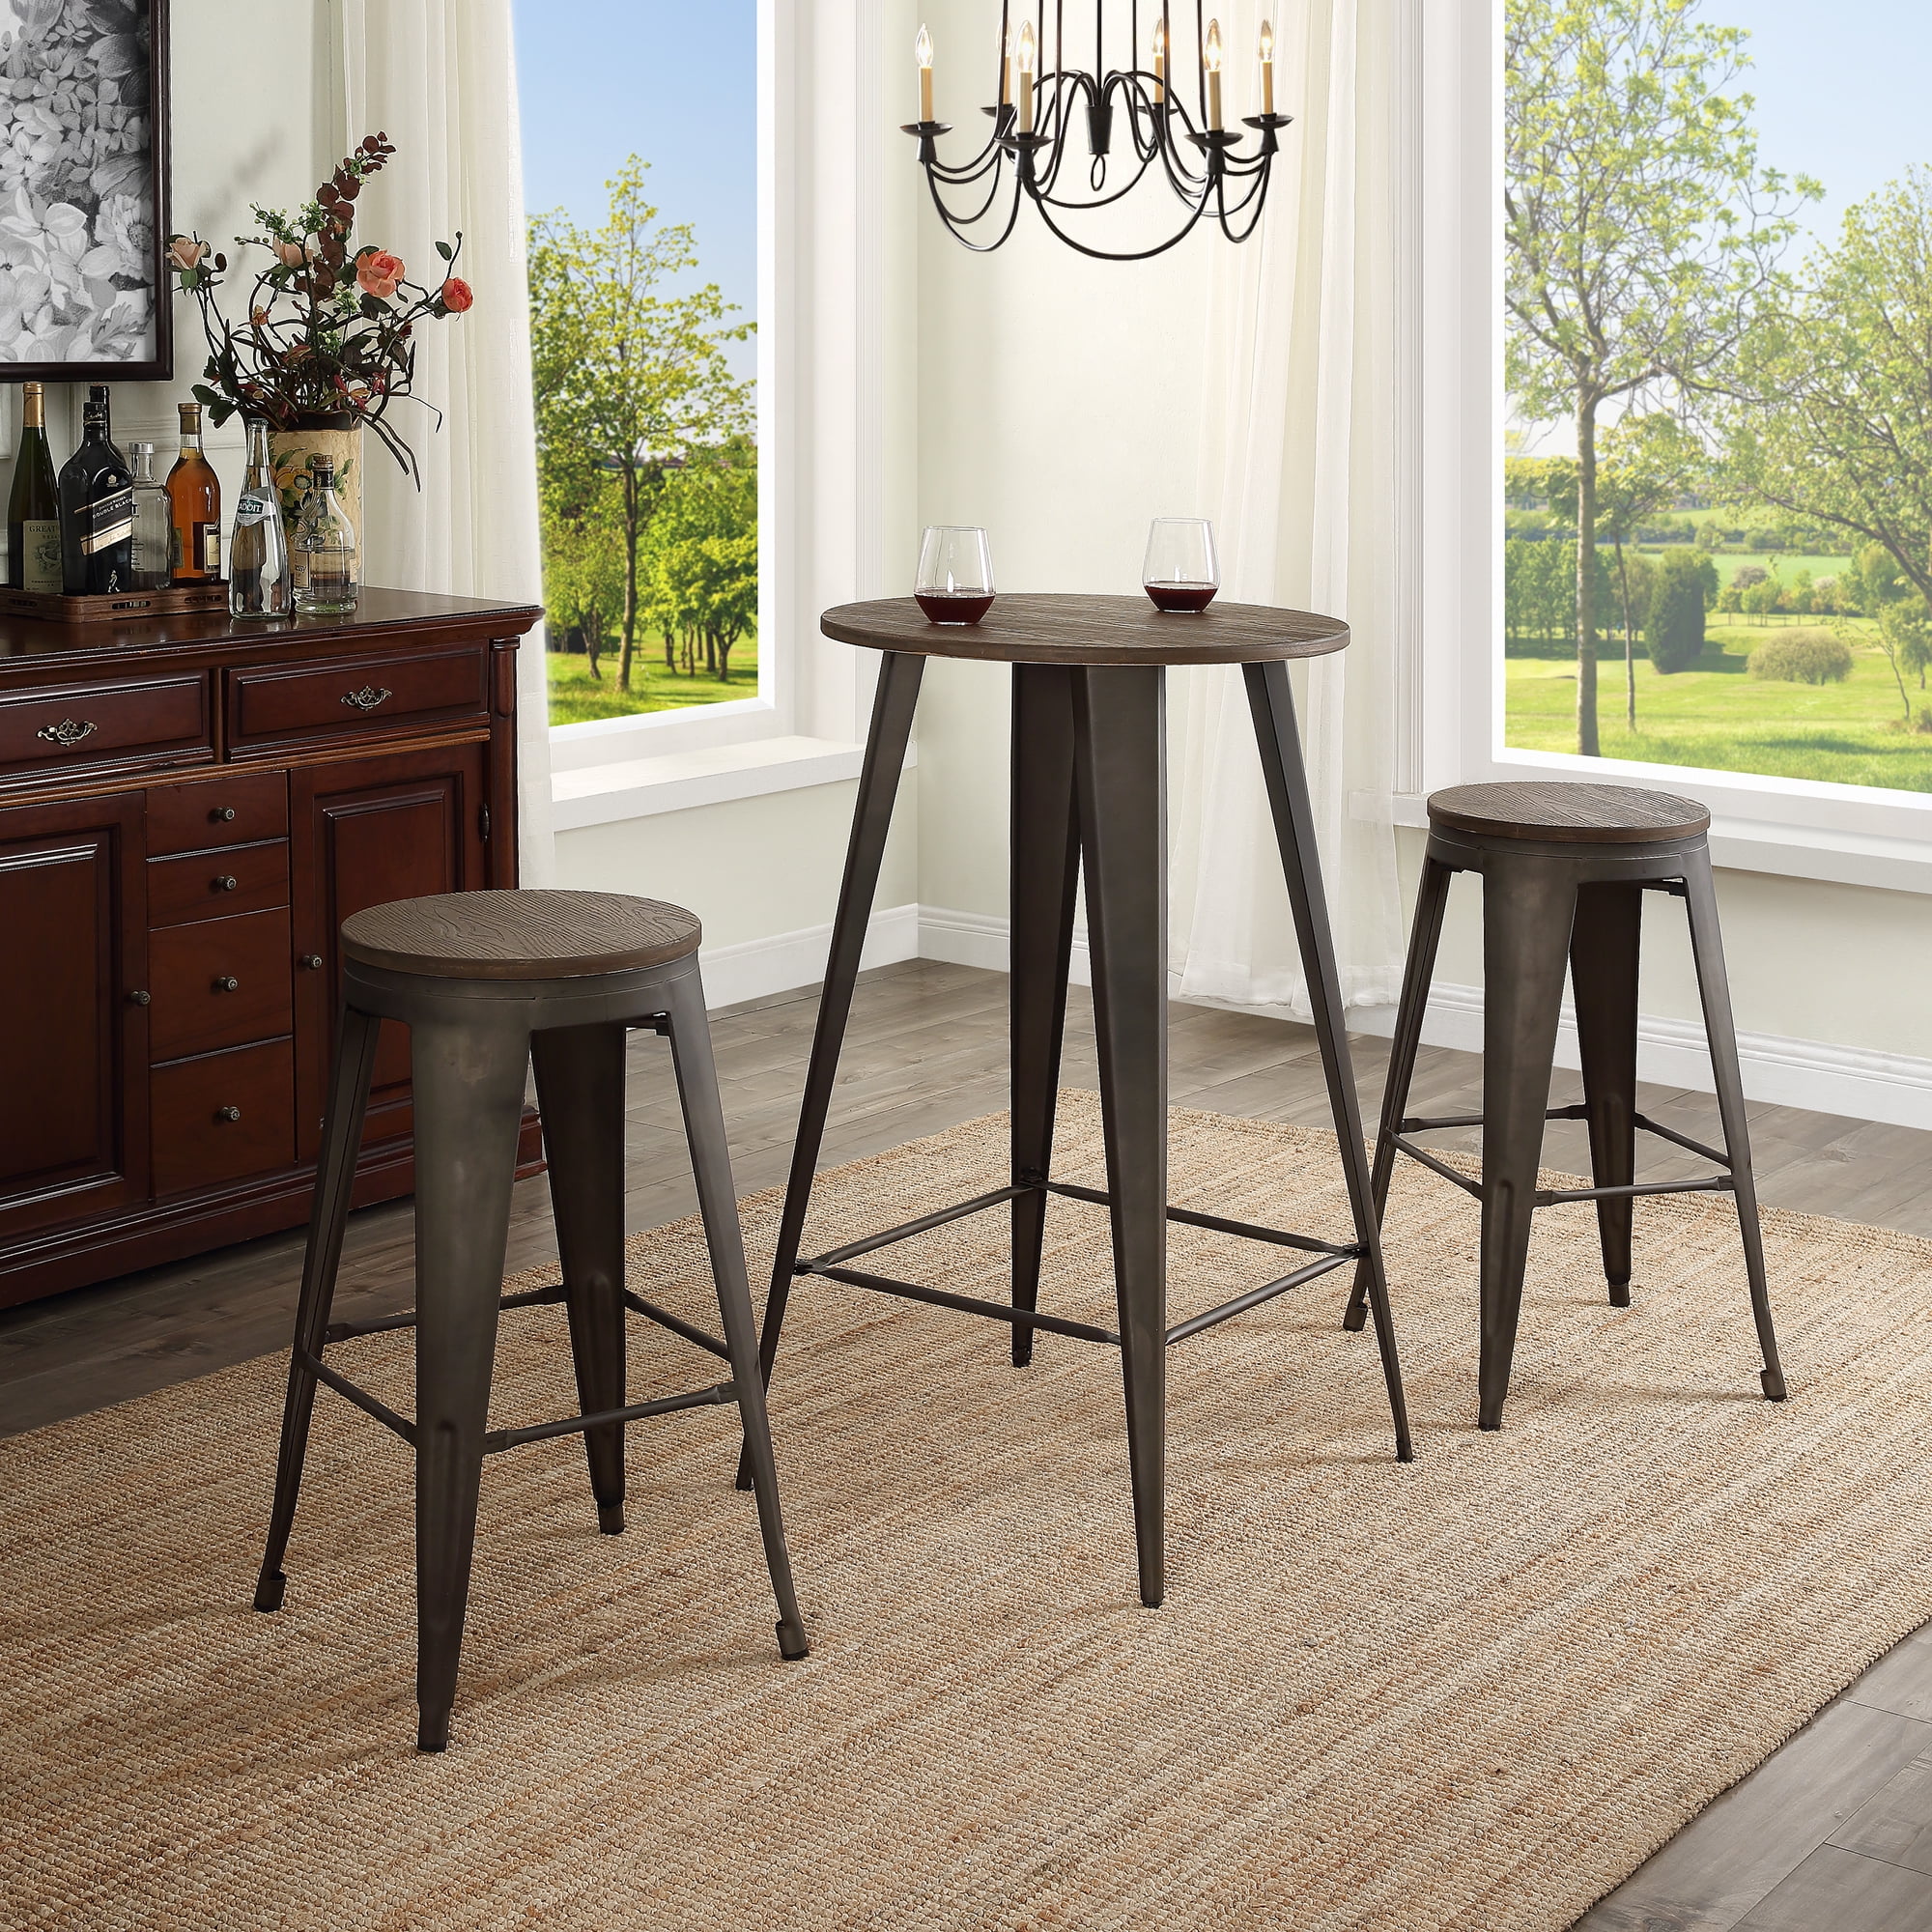 Dining Table Set With 2 Bar Stools, Pub Style Dining Table And Chairs